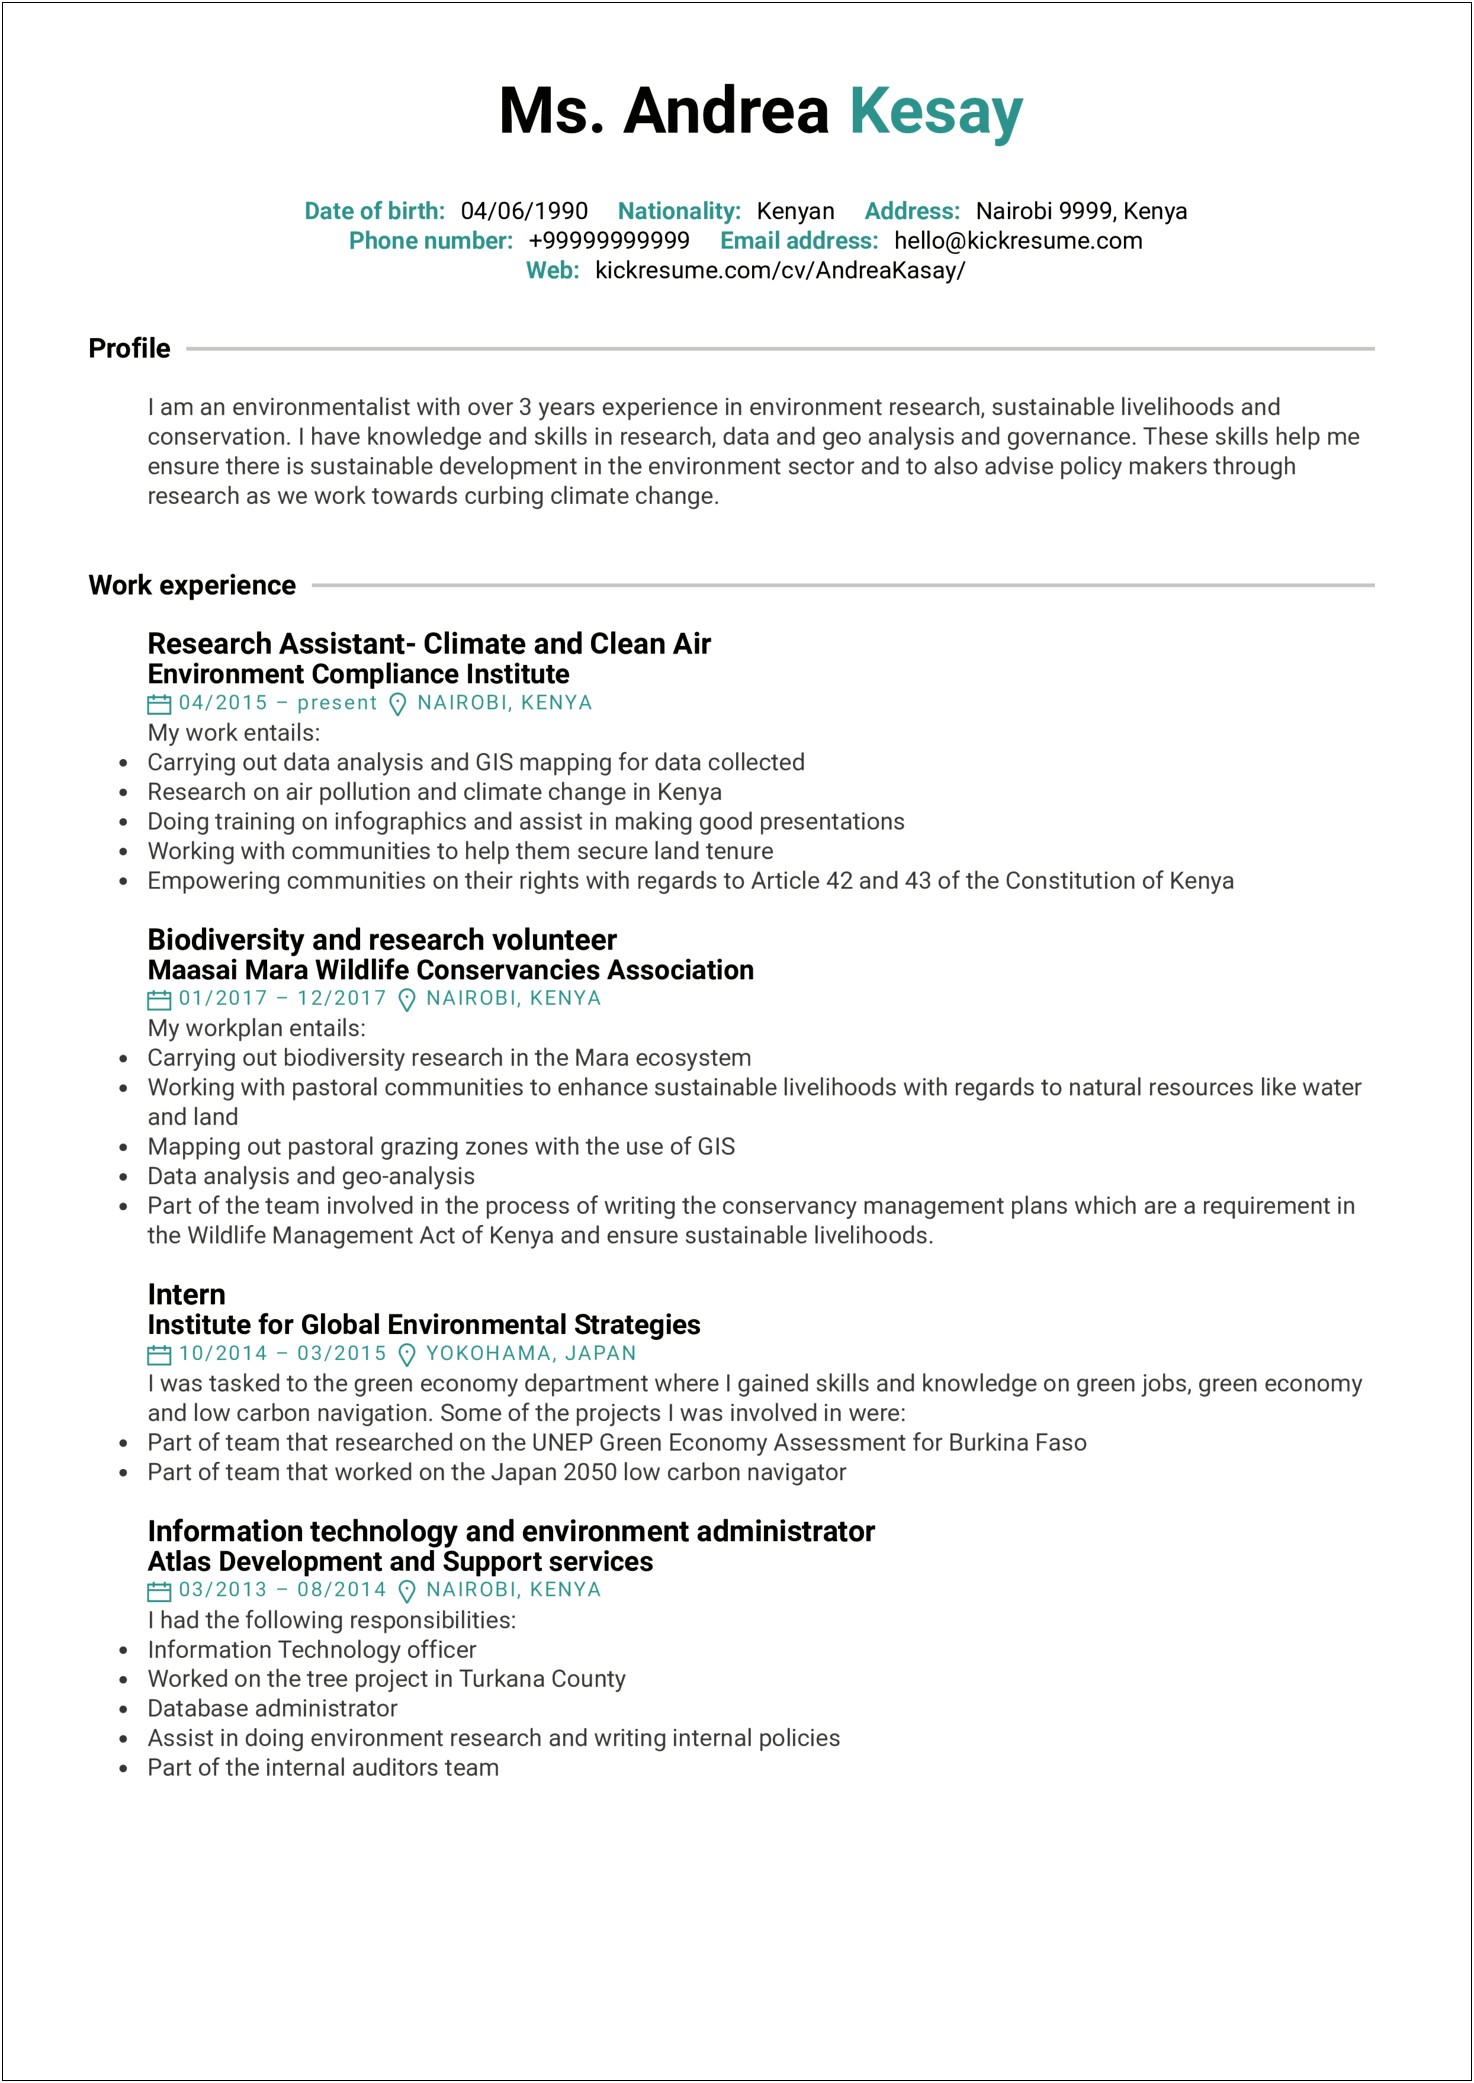 Example Of The Profile Part Of A Resume